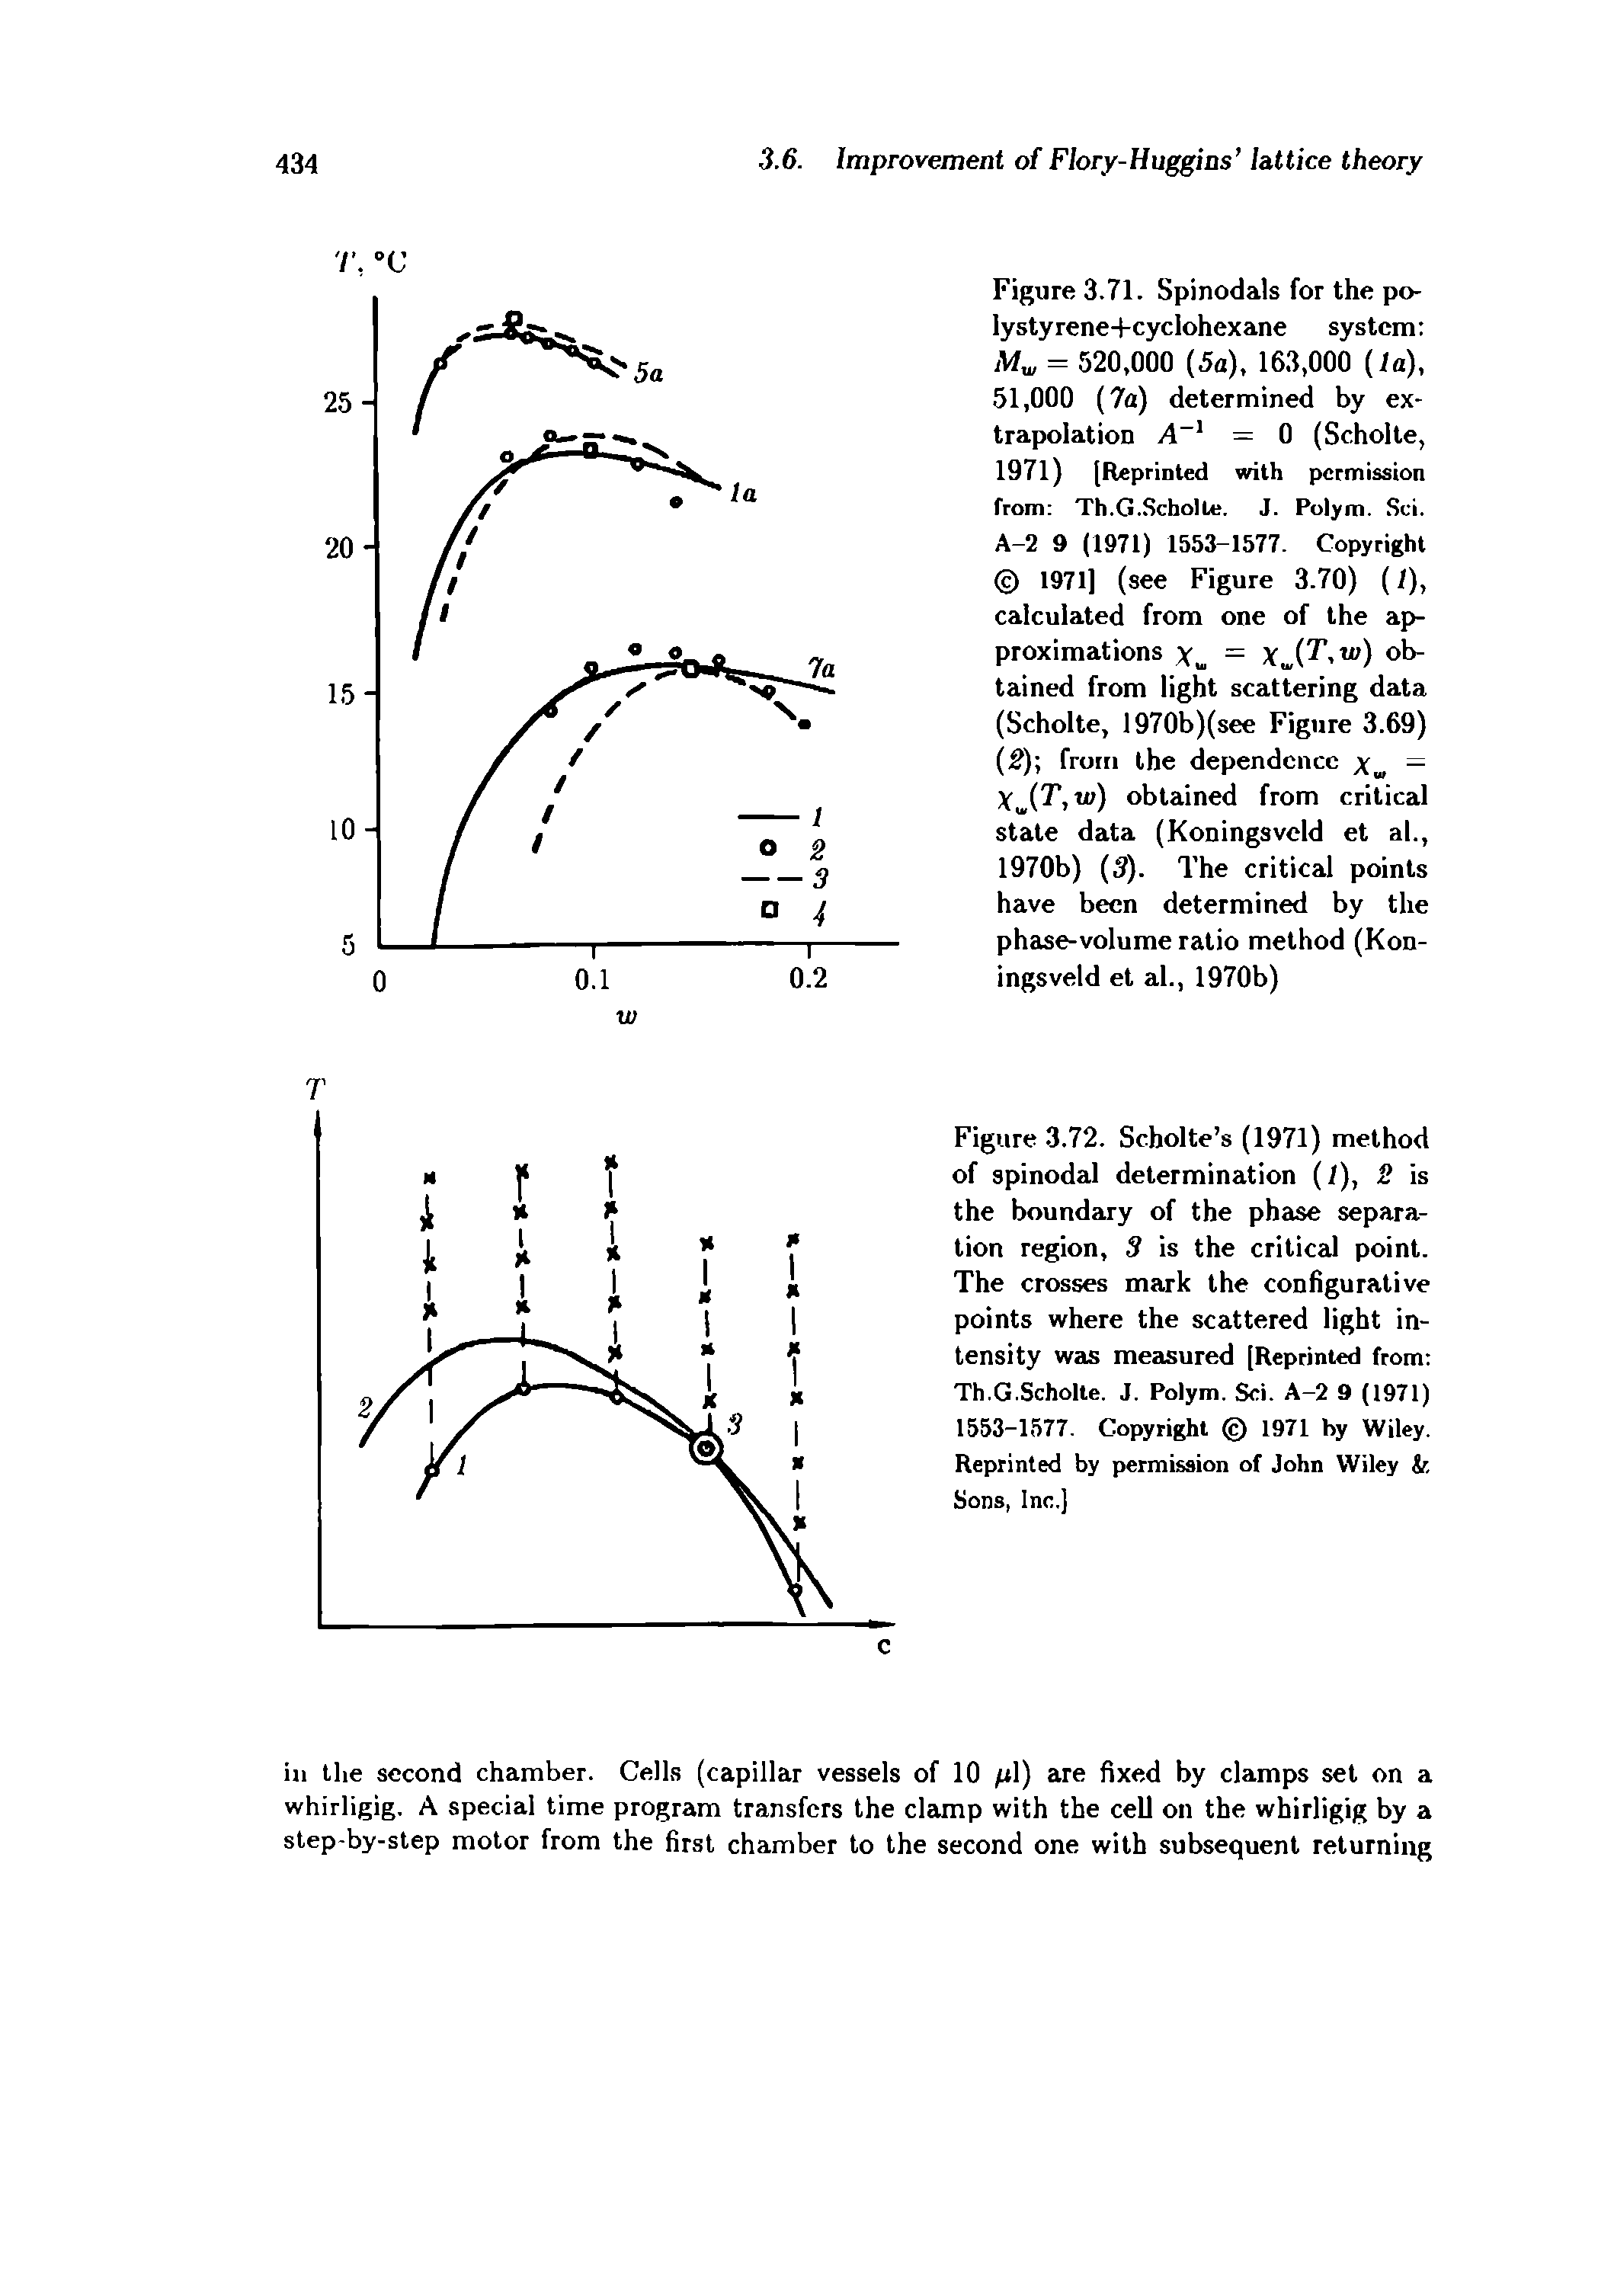 Figure 3.72. Scholte s (1971) method of spinodal determination (I), S is the boundary of the phase separation region, 3 is the critical point. The crosses mark the conhgurative points where the scattered light intensity was measured [Reprinted from Th.G.Scholte. J. Polym. Sci. A-2 9 (1971) 1553-1577. Copyright 1971 by Wiley. Reprinted by permission of John Wiley tr. Sons, Inc.)...